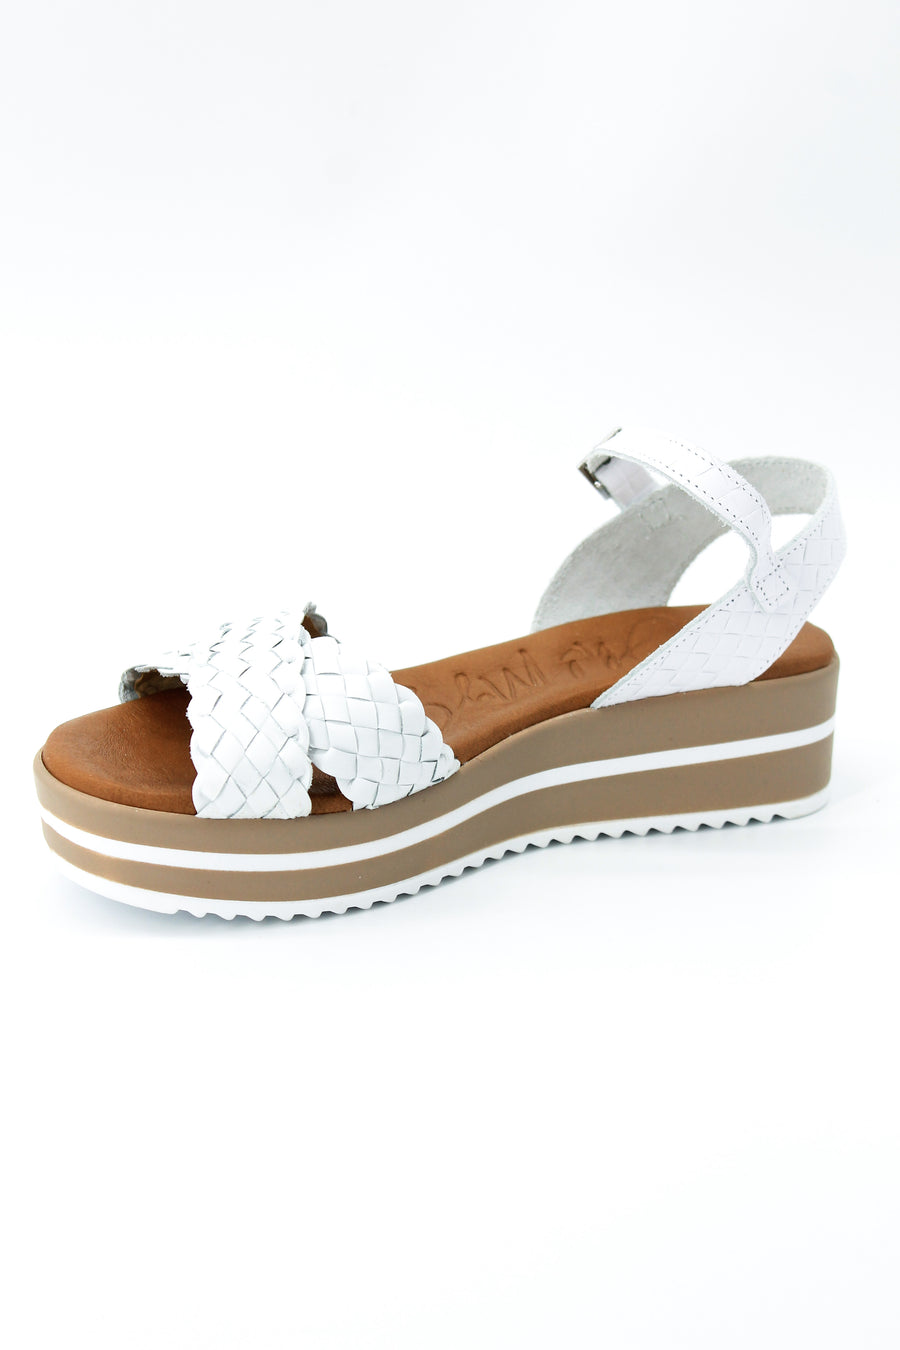 Oh My Sandals 5273 White